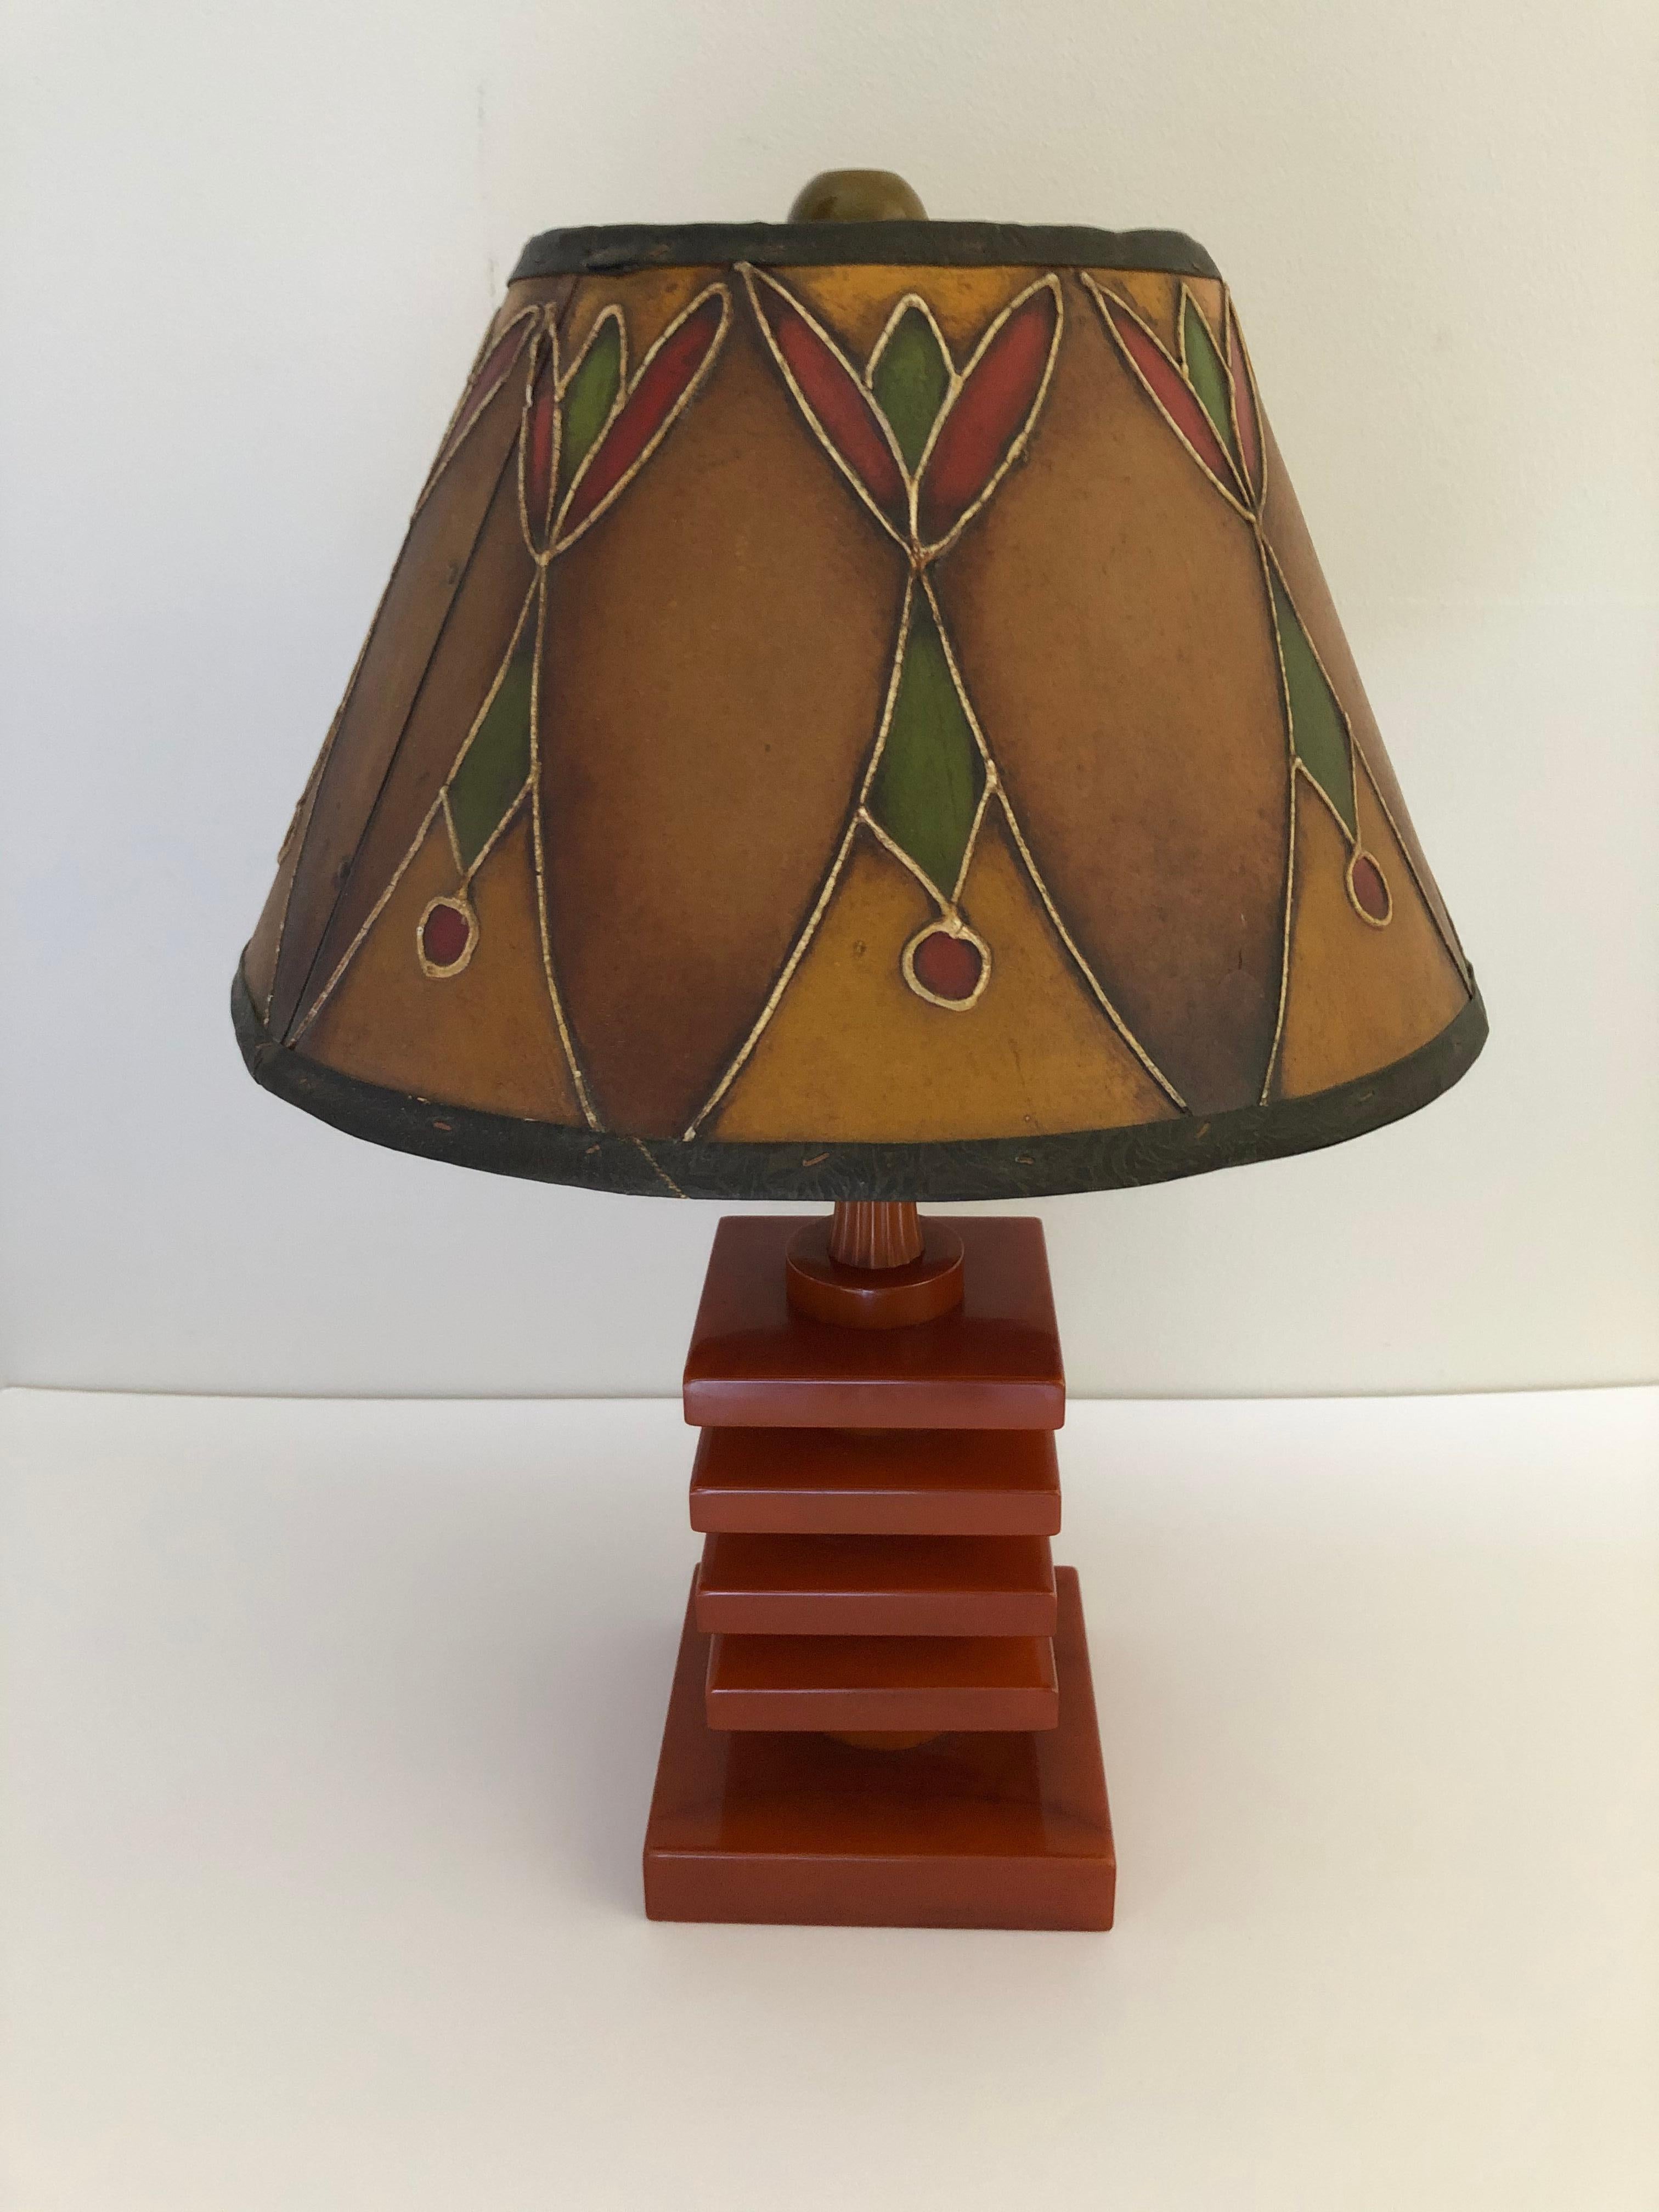 Art Deco Bakelite Catalin lamp, together with an original hand decorated Art Deco organic design shade, in all original working condition in a private collection for 40 years. Shade measurement is 12